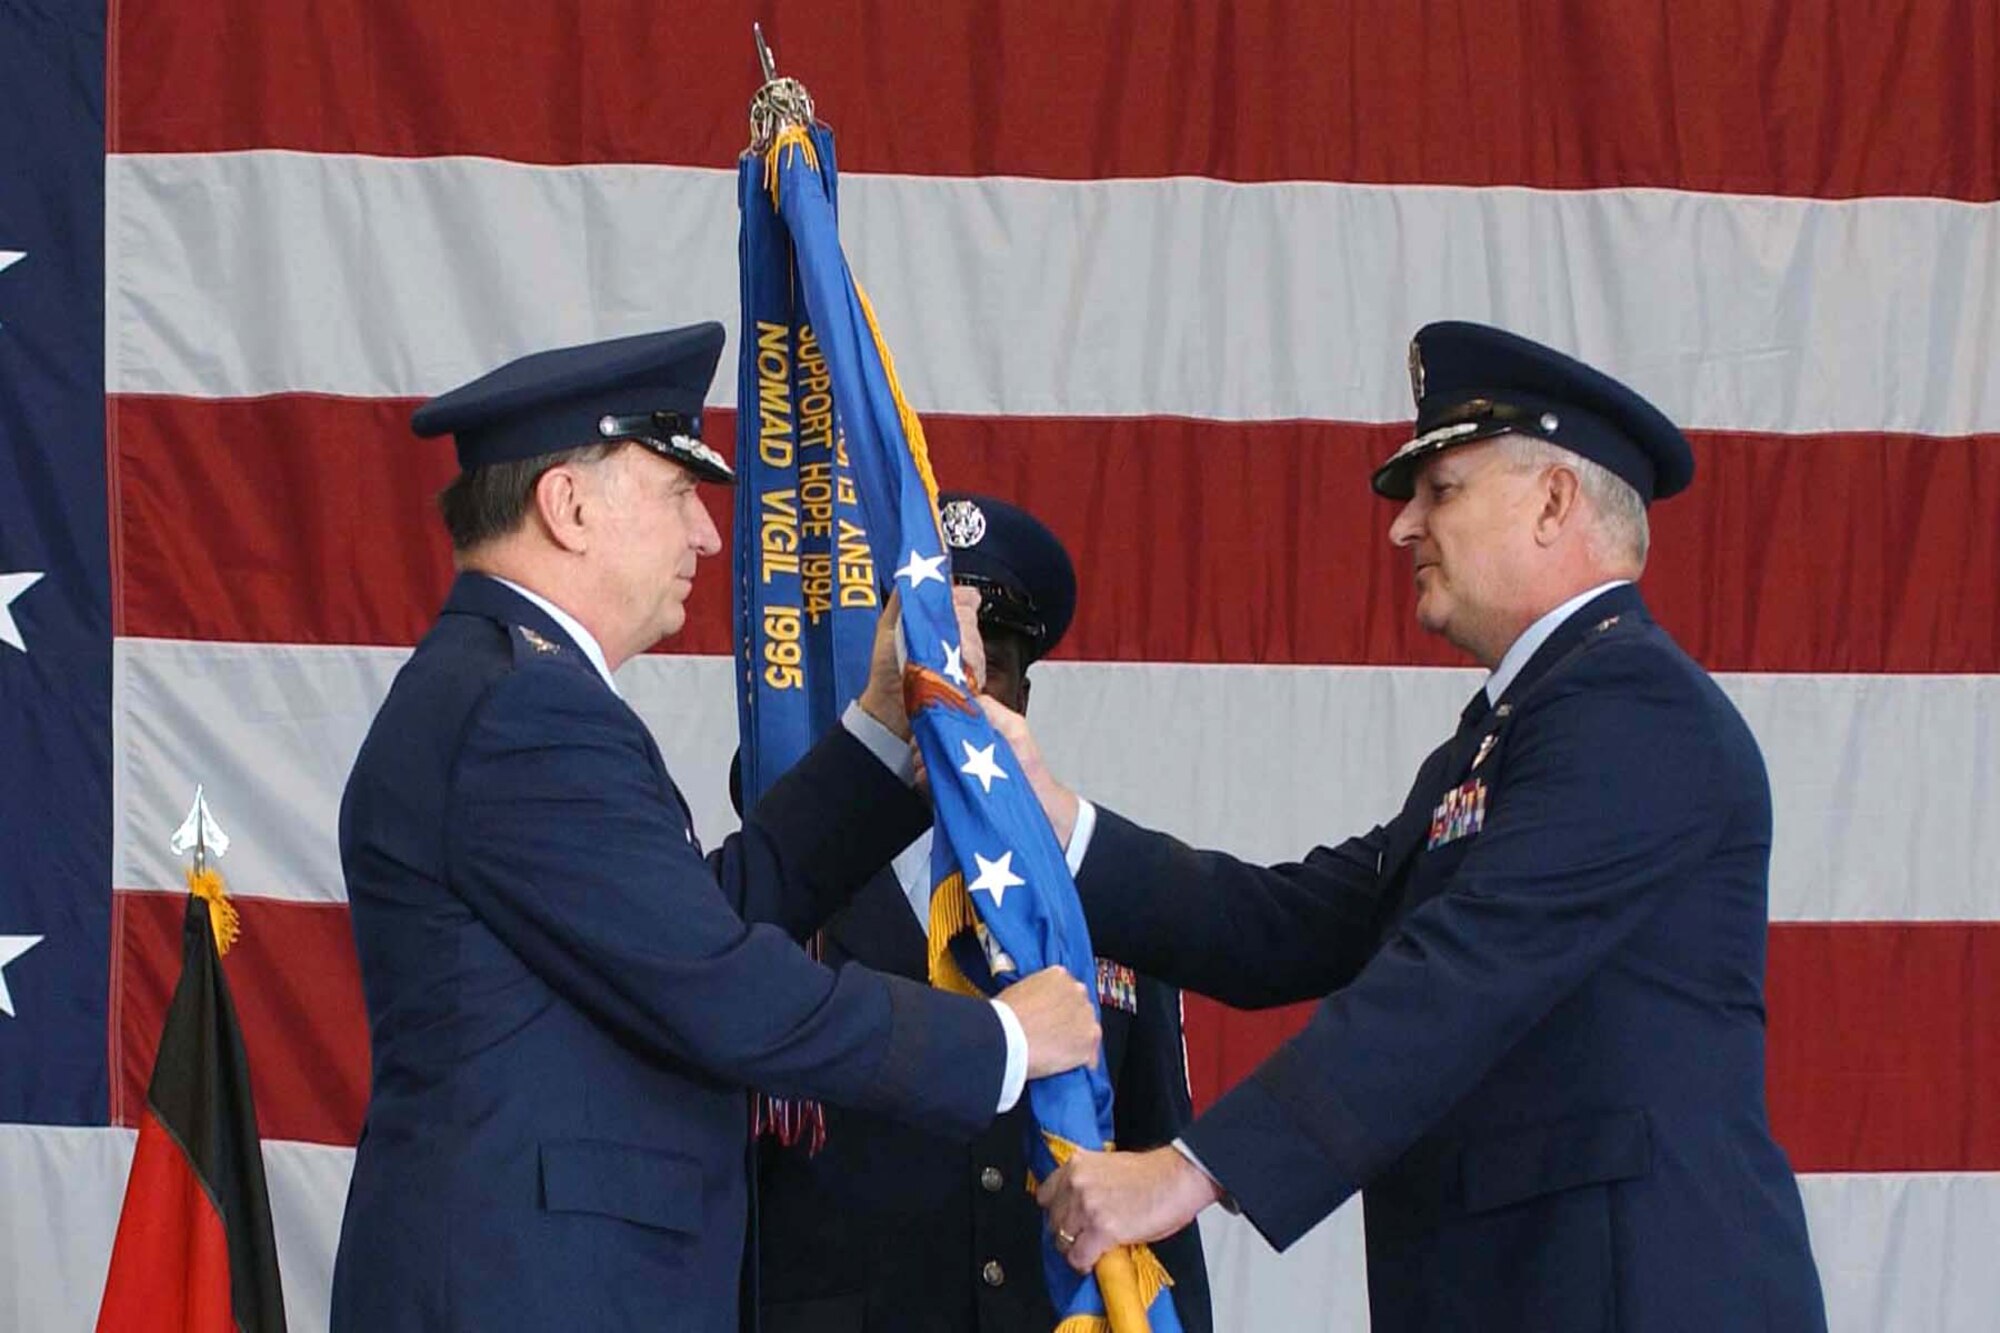 With the inactivation of 16th Air Force and the reactivation of 3rd Air Force, Maj. Gen. Paul J. Fletcher (right), 16th Air Force commander, relinquishes command, passing the 16th AF flag to Gen. William T. Hobbins, U.S. Air Forces in Europe commander, during the reactivation ceremony at Ramstein Air Base, Germany, Dec. 1.  The responsibilities of 16th AF will be assumed by 3rd AF.  (U.S. Air Force photo/Senior Airman Megan M. Carrico)